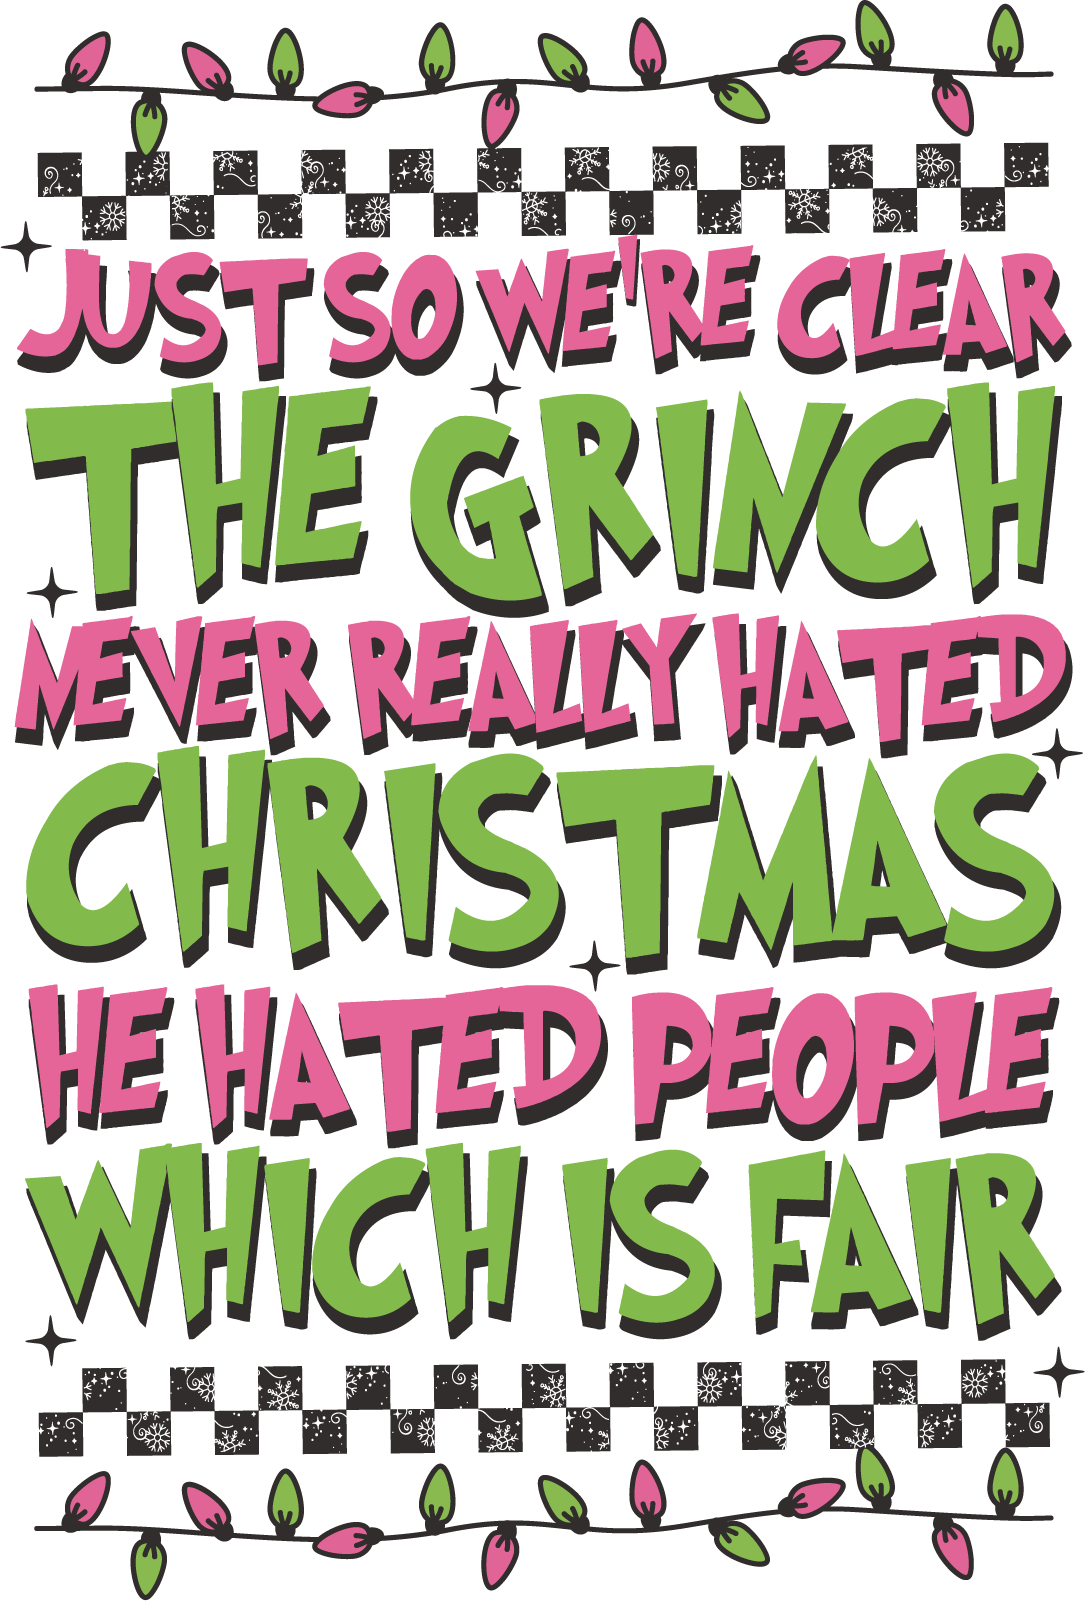 Grinch Didn't Hate Christmas, He Hated People, Which is Fair  w/ Pocket Image